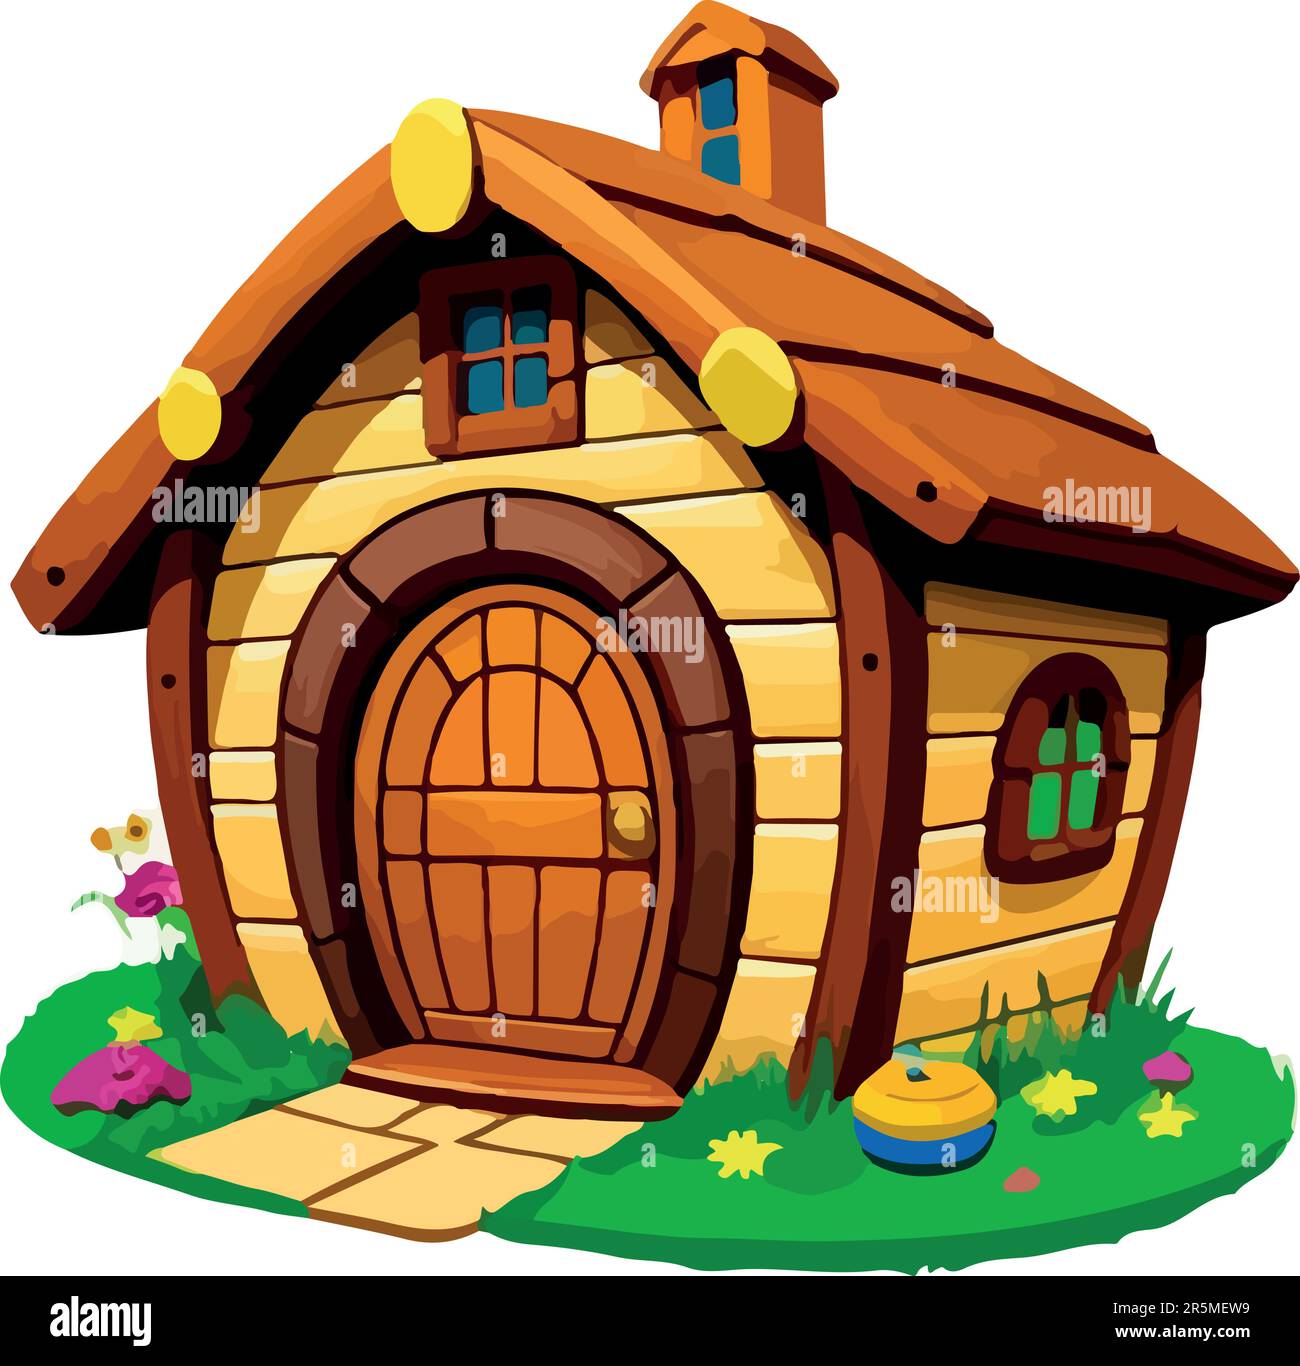 Awesome and cuteness dwarf and hobbit house Stock Vector